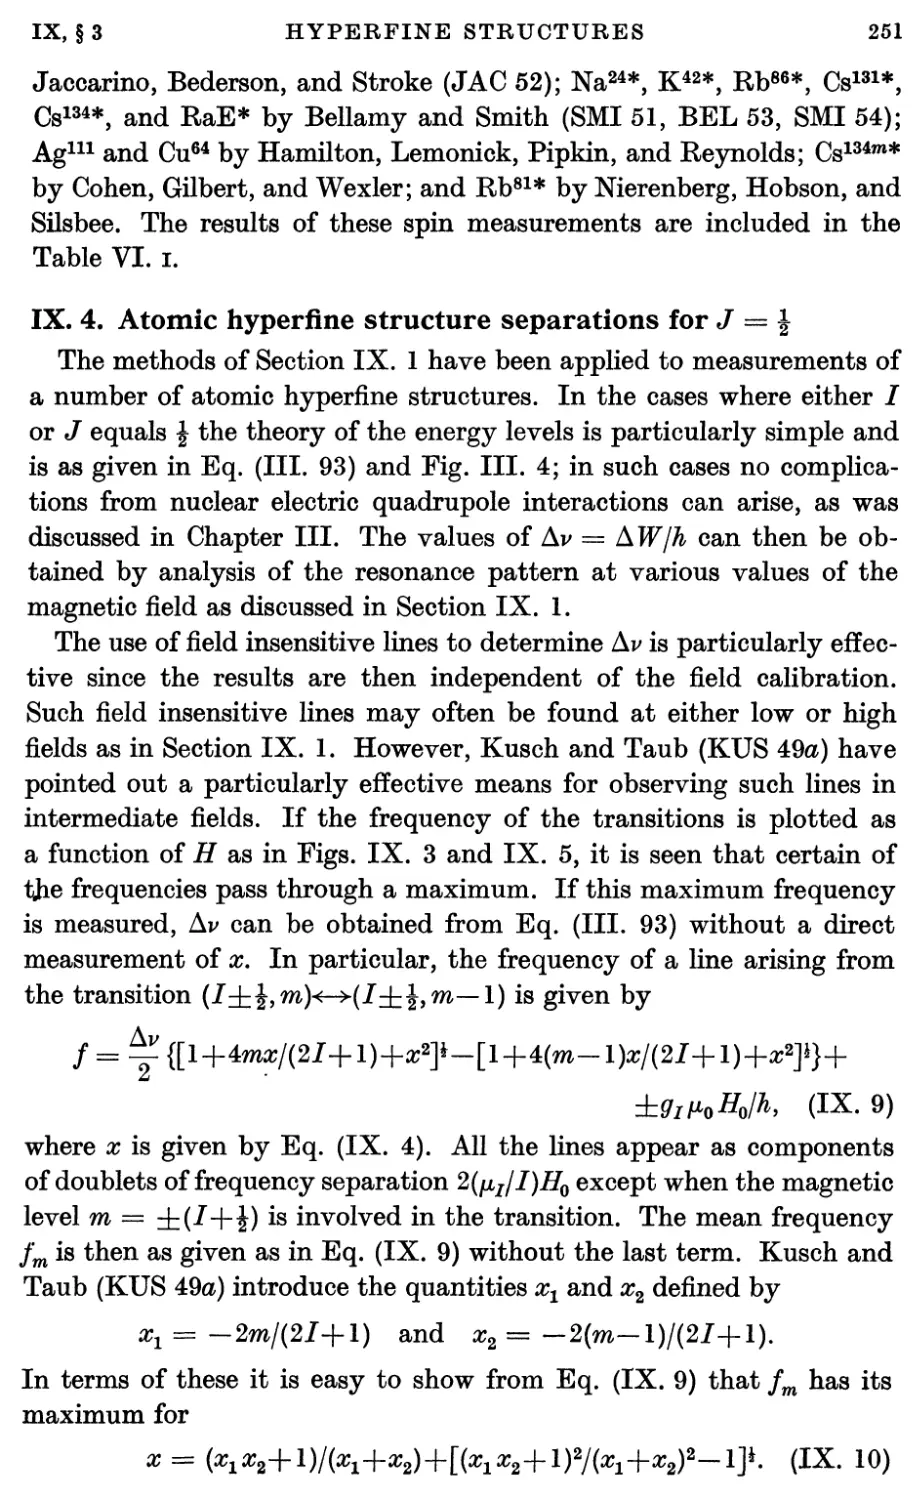 IX.4. Atomic Hyperfine Structure Separations for J = 1/2